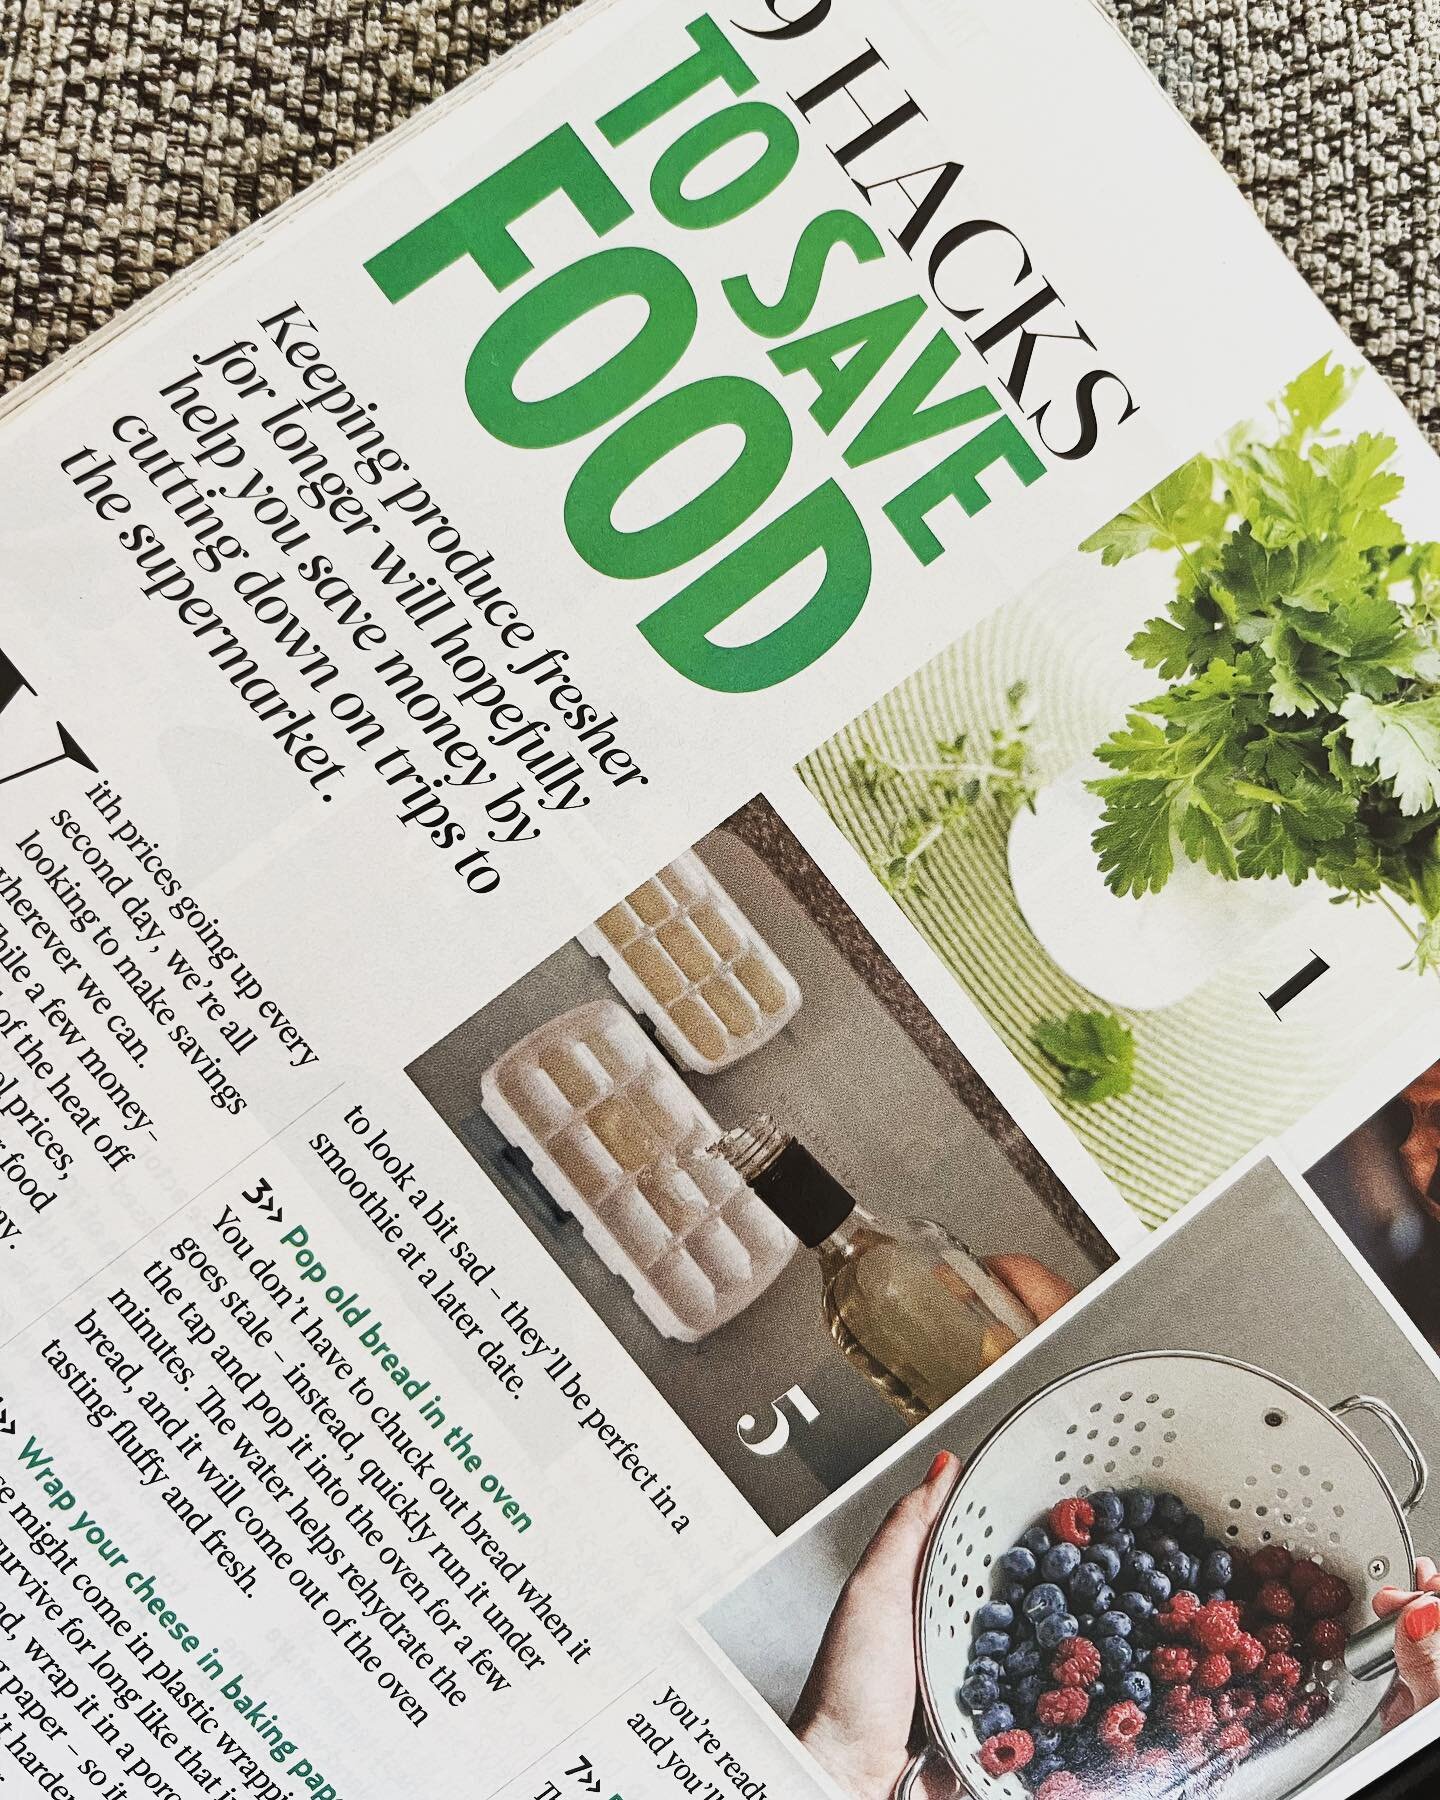 We&rsquo;re all feeling the pinch right now, but we&rsquo;ve got some savvy kitchen hacks to help you cut down on food waste. ⁣
⁣
What are your biggest food storage tips for making your food last longer? ⁣
⁣
#foodhacks #foodstorage #foodtips #magazin